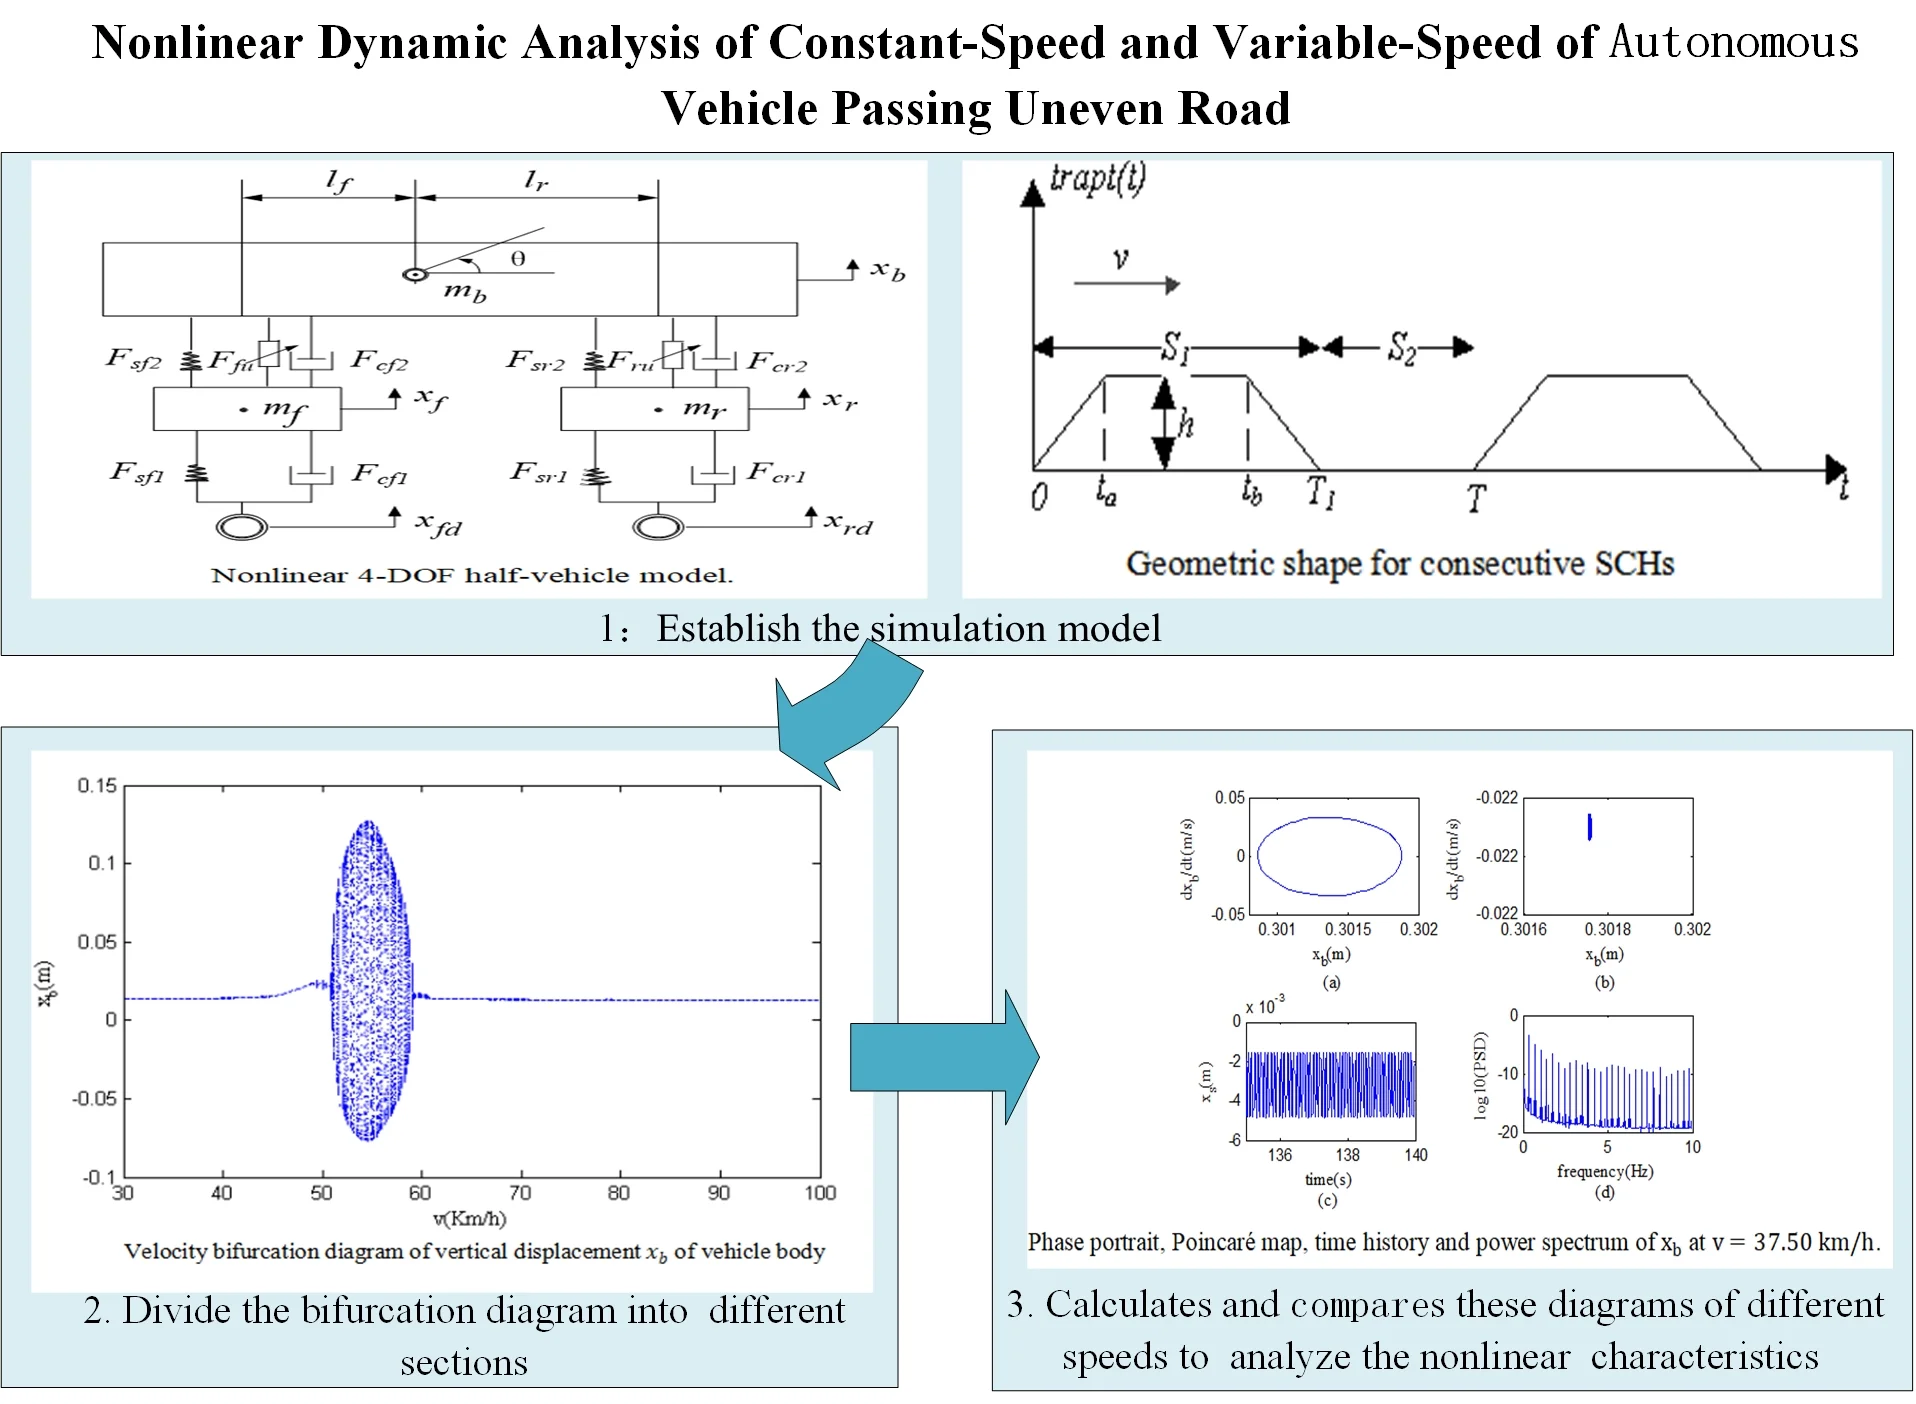 Nonlinear dynamic analysis of constant-speed and variable-speed of autonomous vehicle passing uneven road